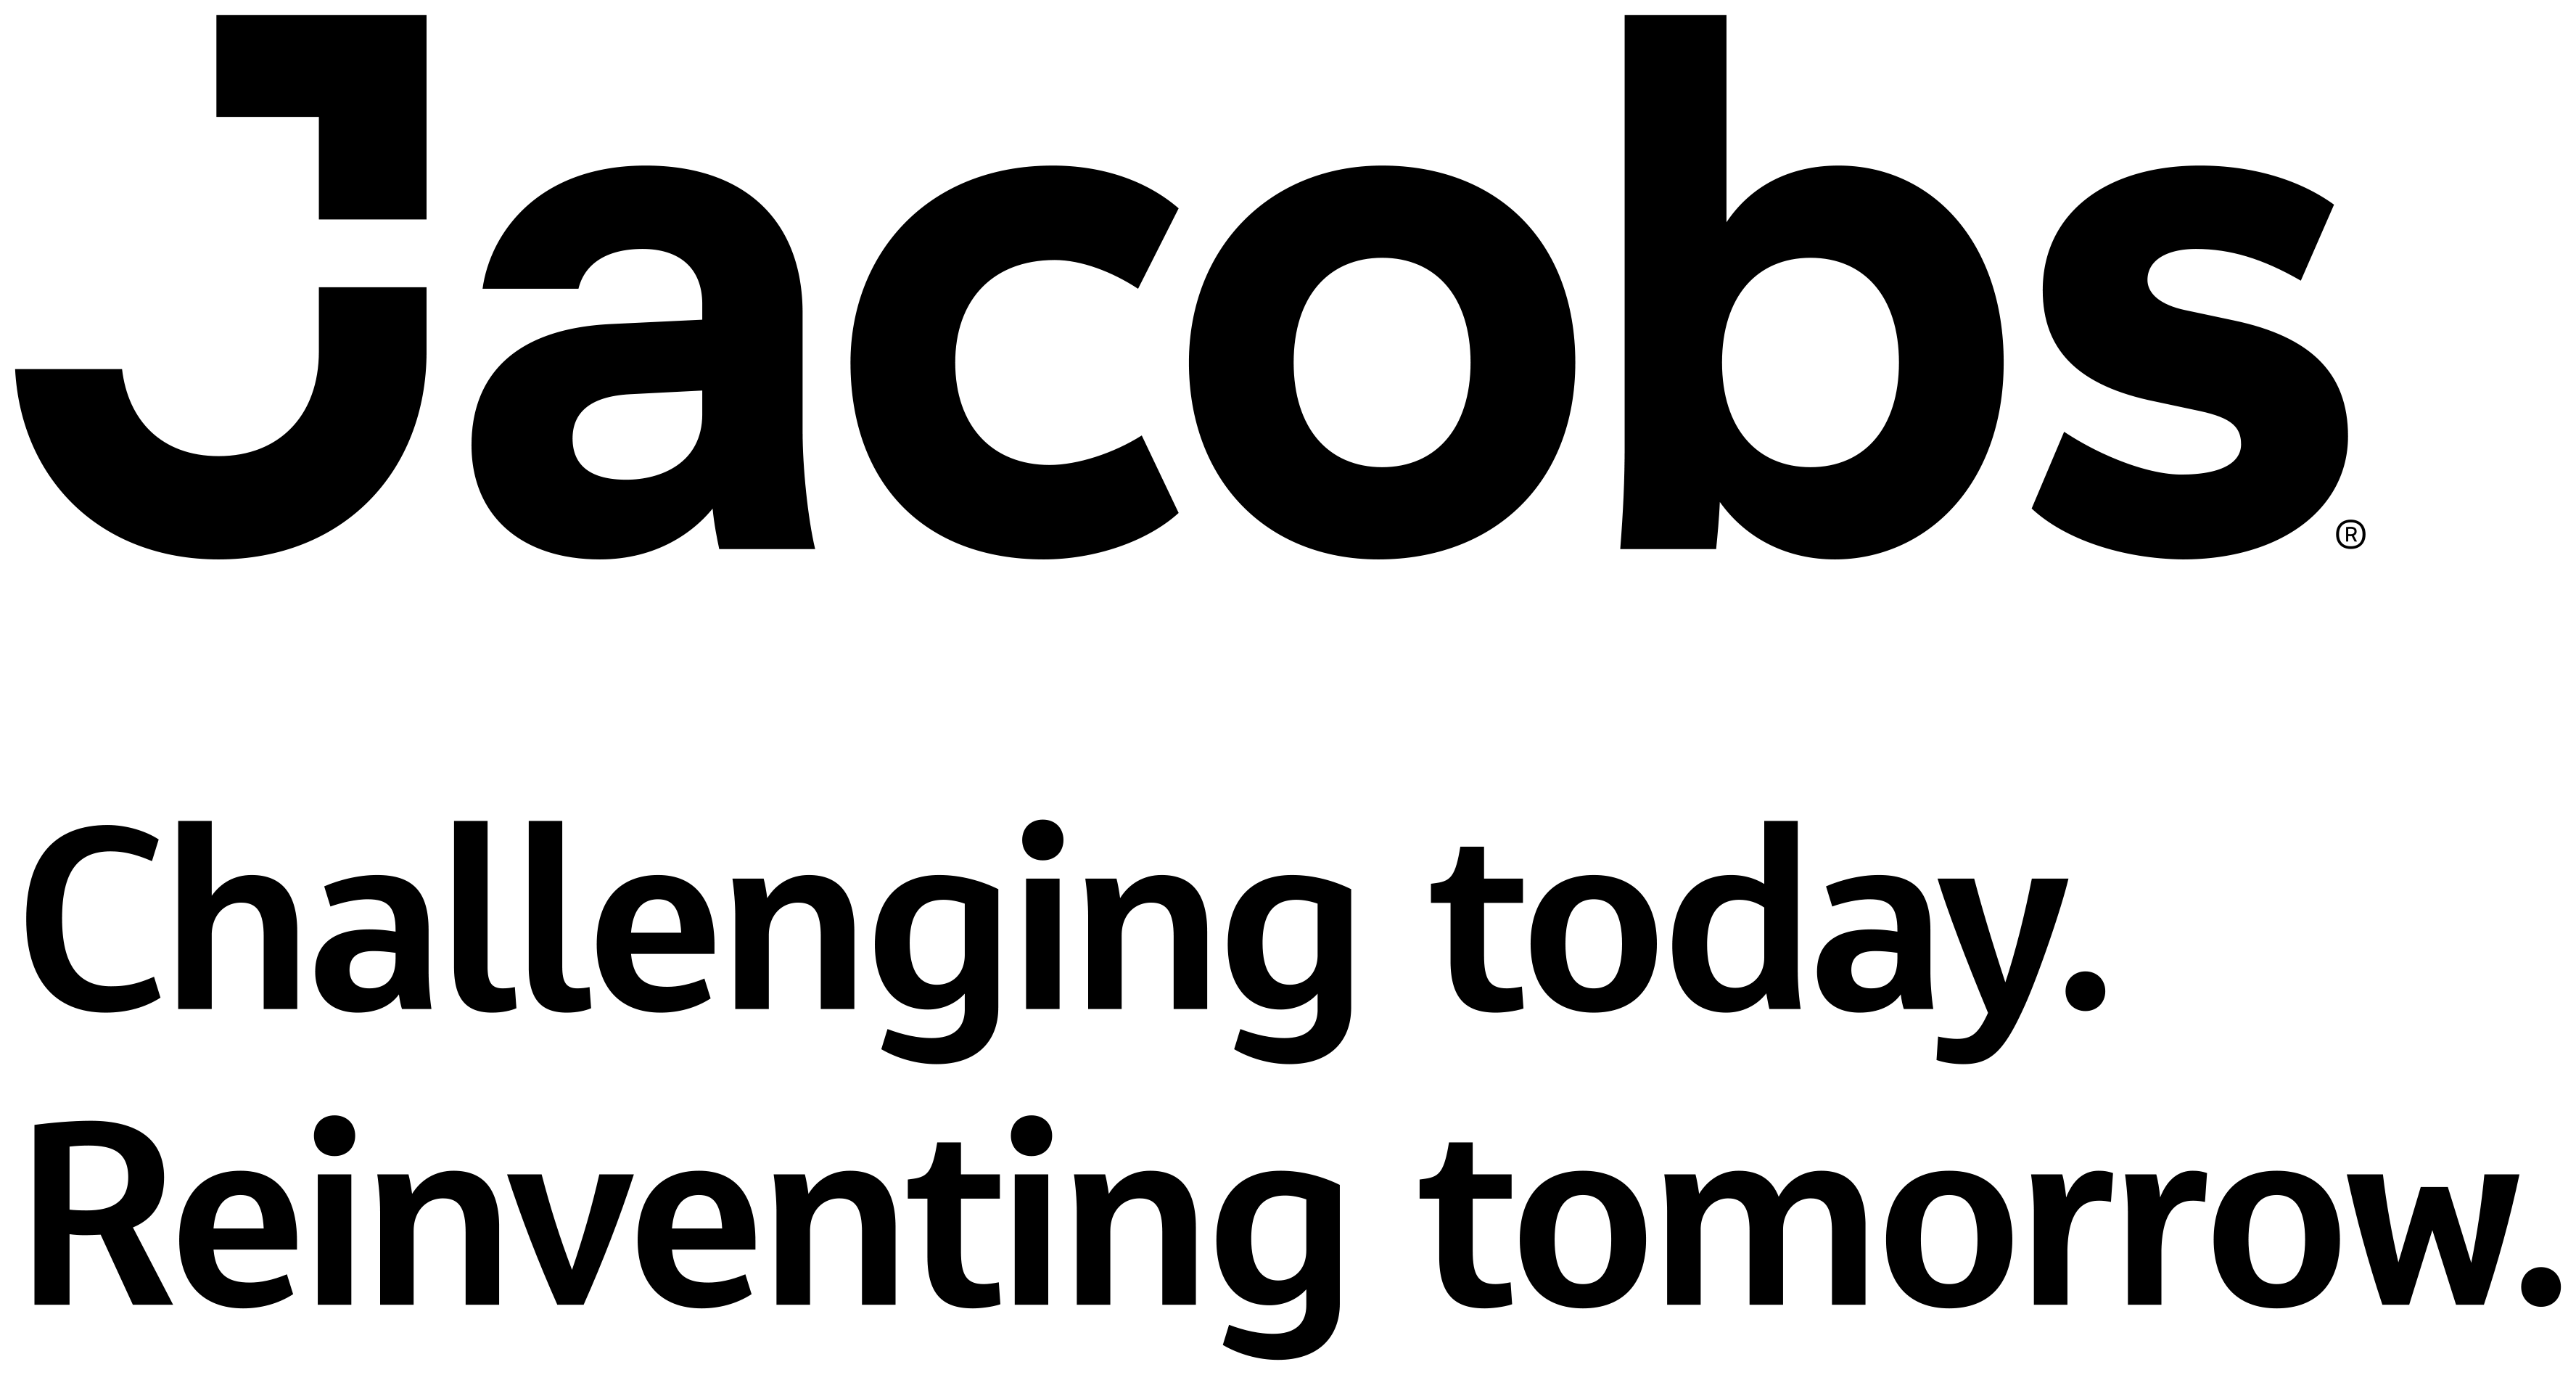 Jacobs company logo written in black text on a white background